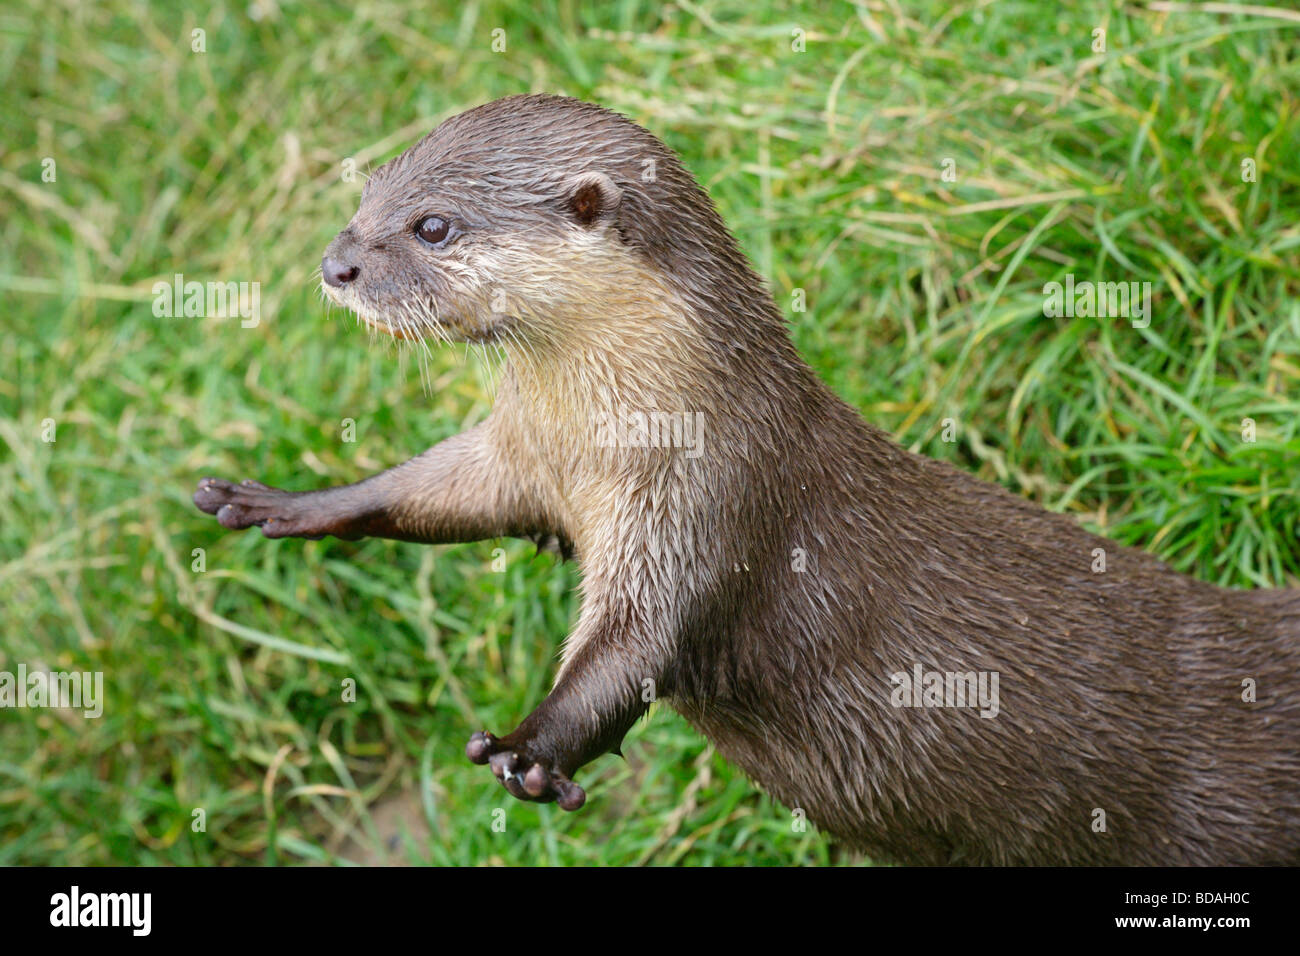 Asian short clawed otter, amblonyx cinereus, displaying front legs with short blunt claws. Stock Photo